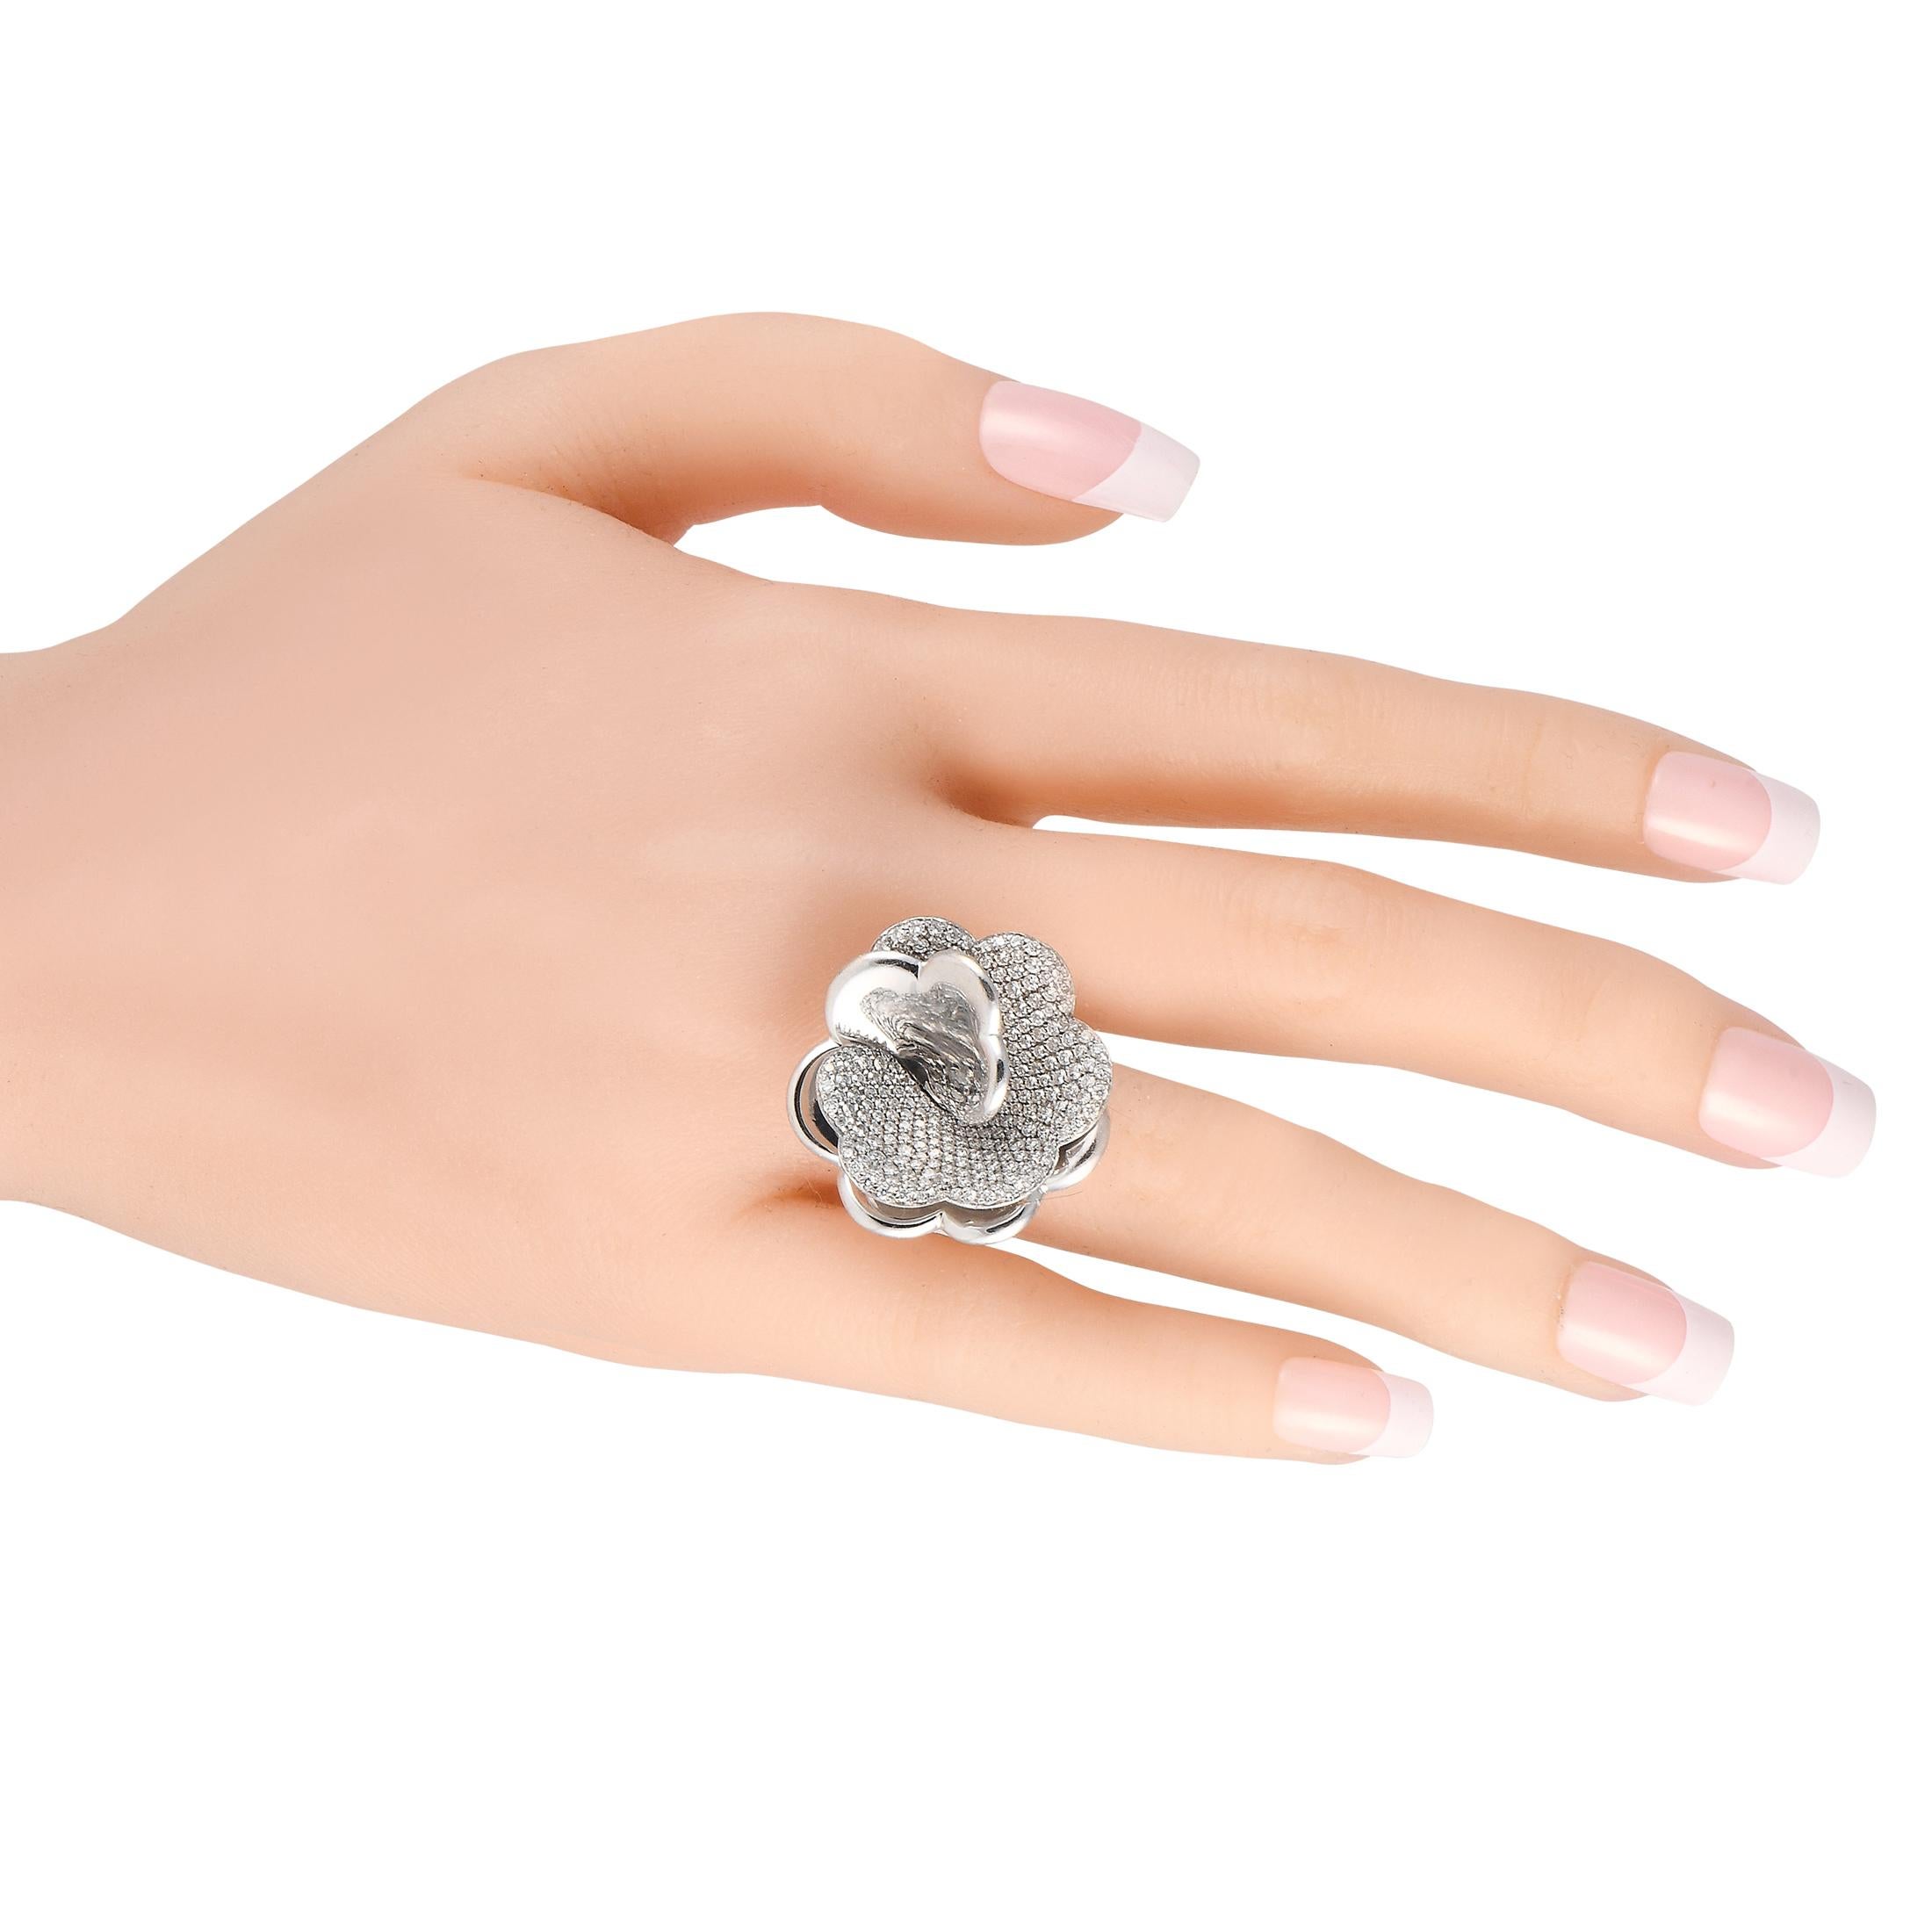 Giorgio Visconti 18K White Gold 3.03ct Diamond Flower Ring In Excellent Condition For Sale In Southampton, PA